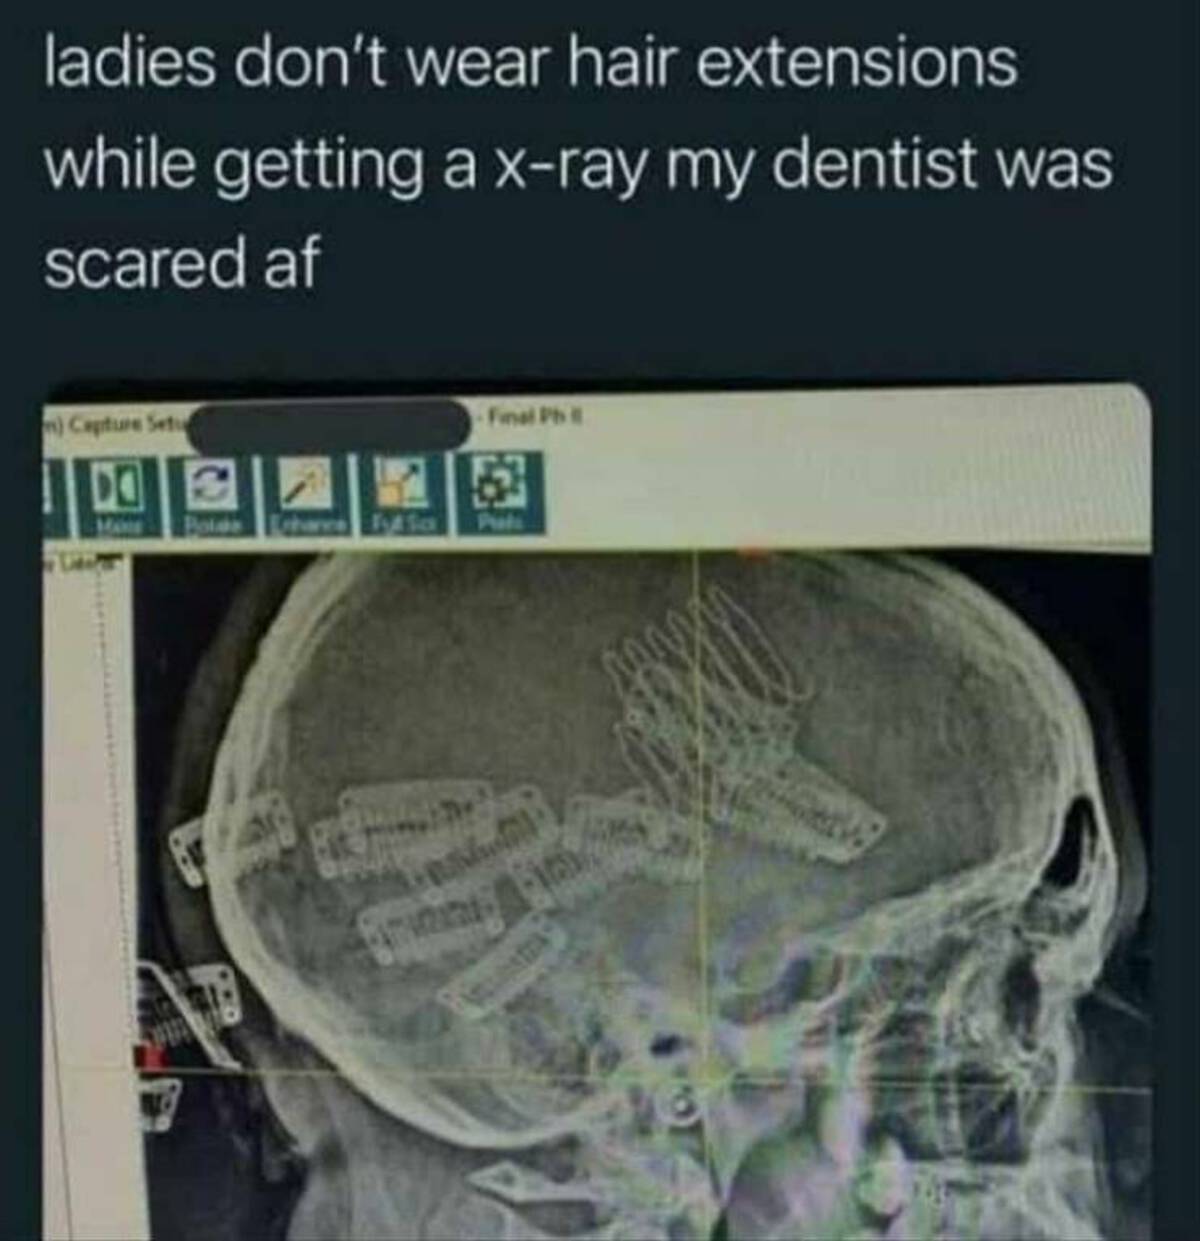 radiology - ladies don't wear hair extensions while getting a xray my dentist was scared af m Capture Setu T De Bolds Futsa Final Ph Firs